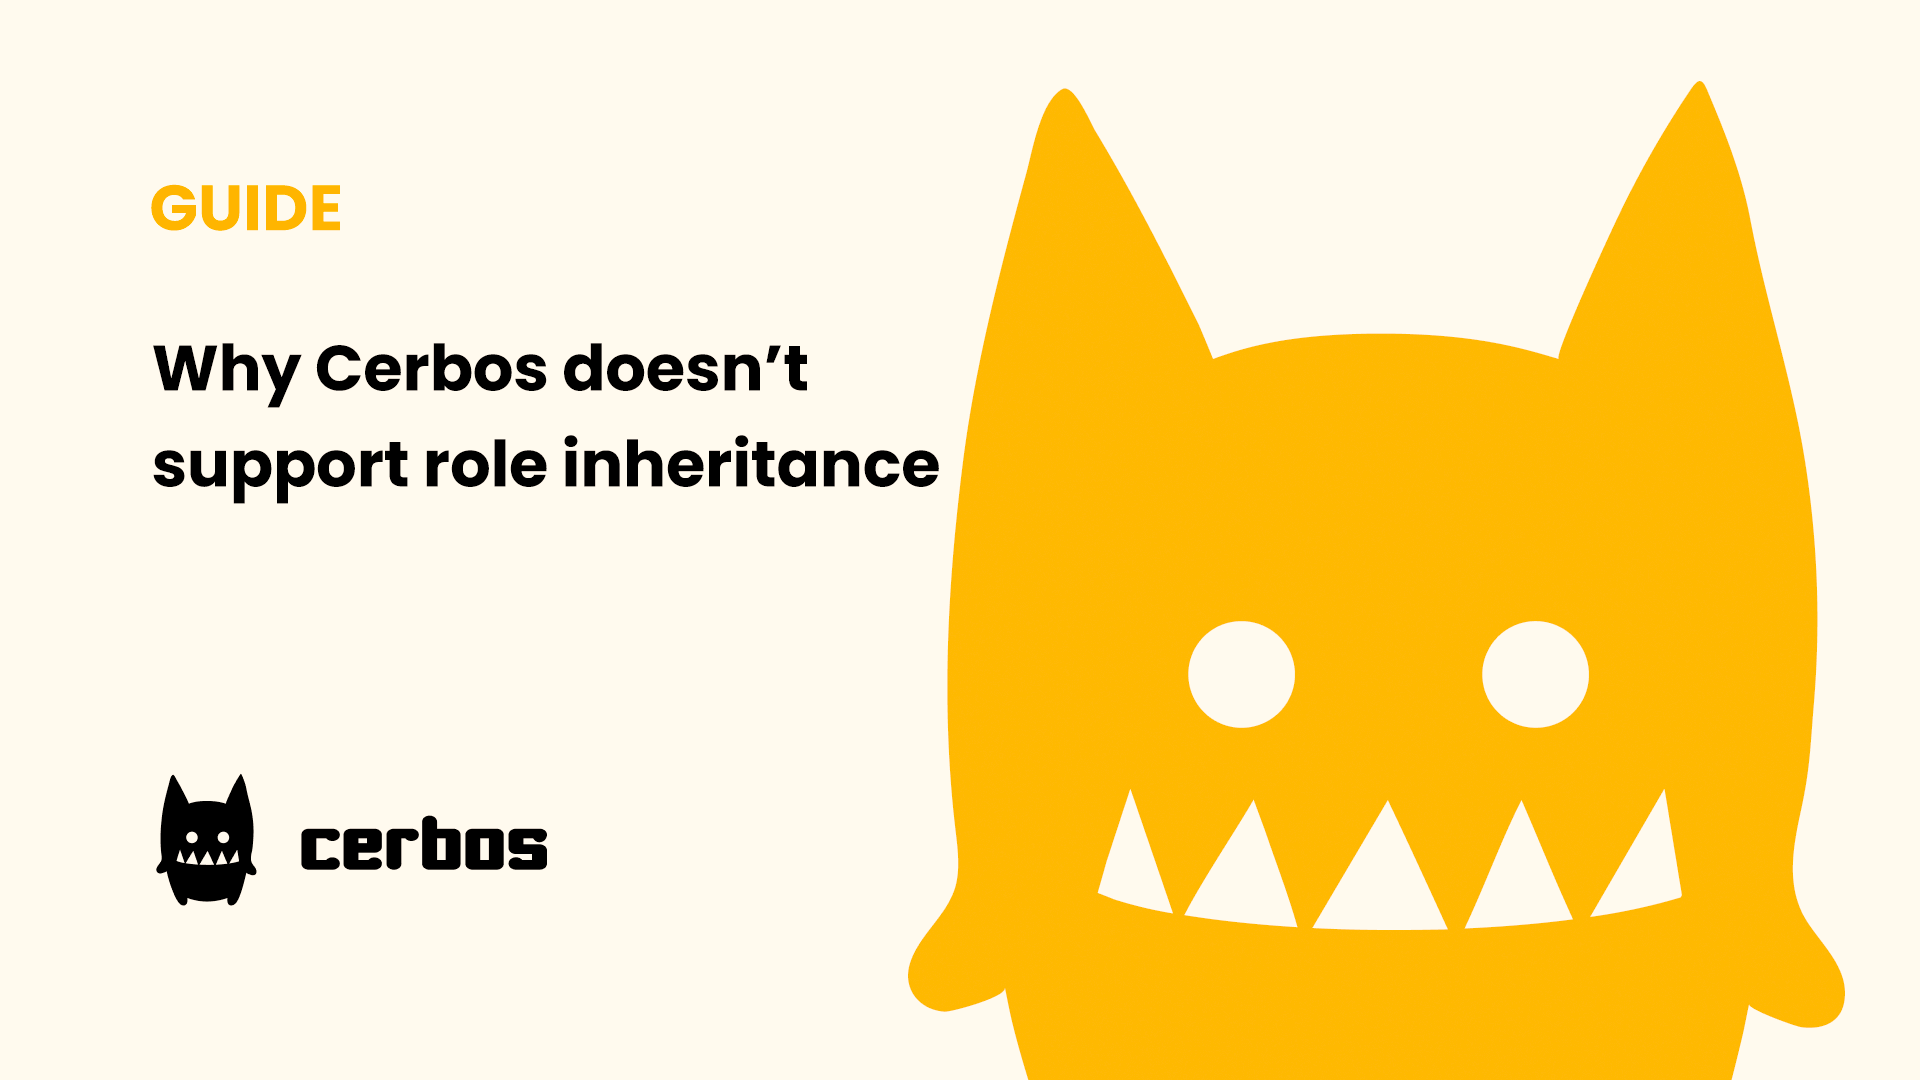 Why Cerbos doesn’t support role inheritance